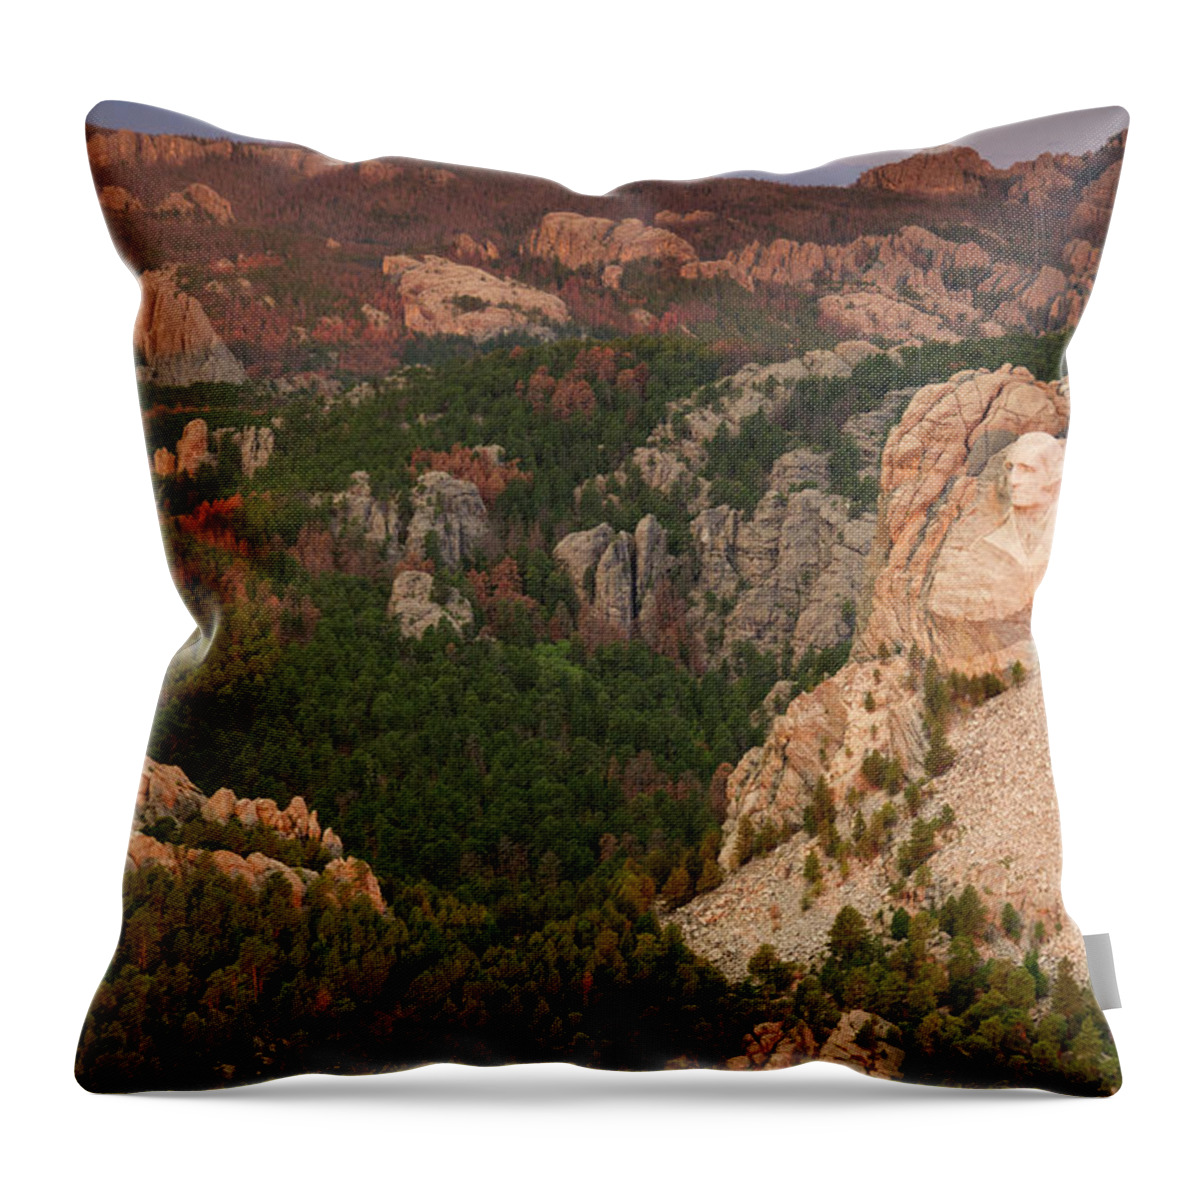 Usa Throw Pillow featuring the photograph Mt. Rushmore With Beetlekill Ponderosa by Peter Essick